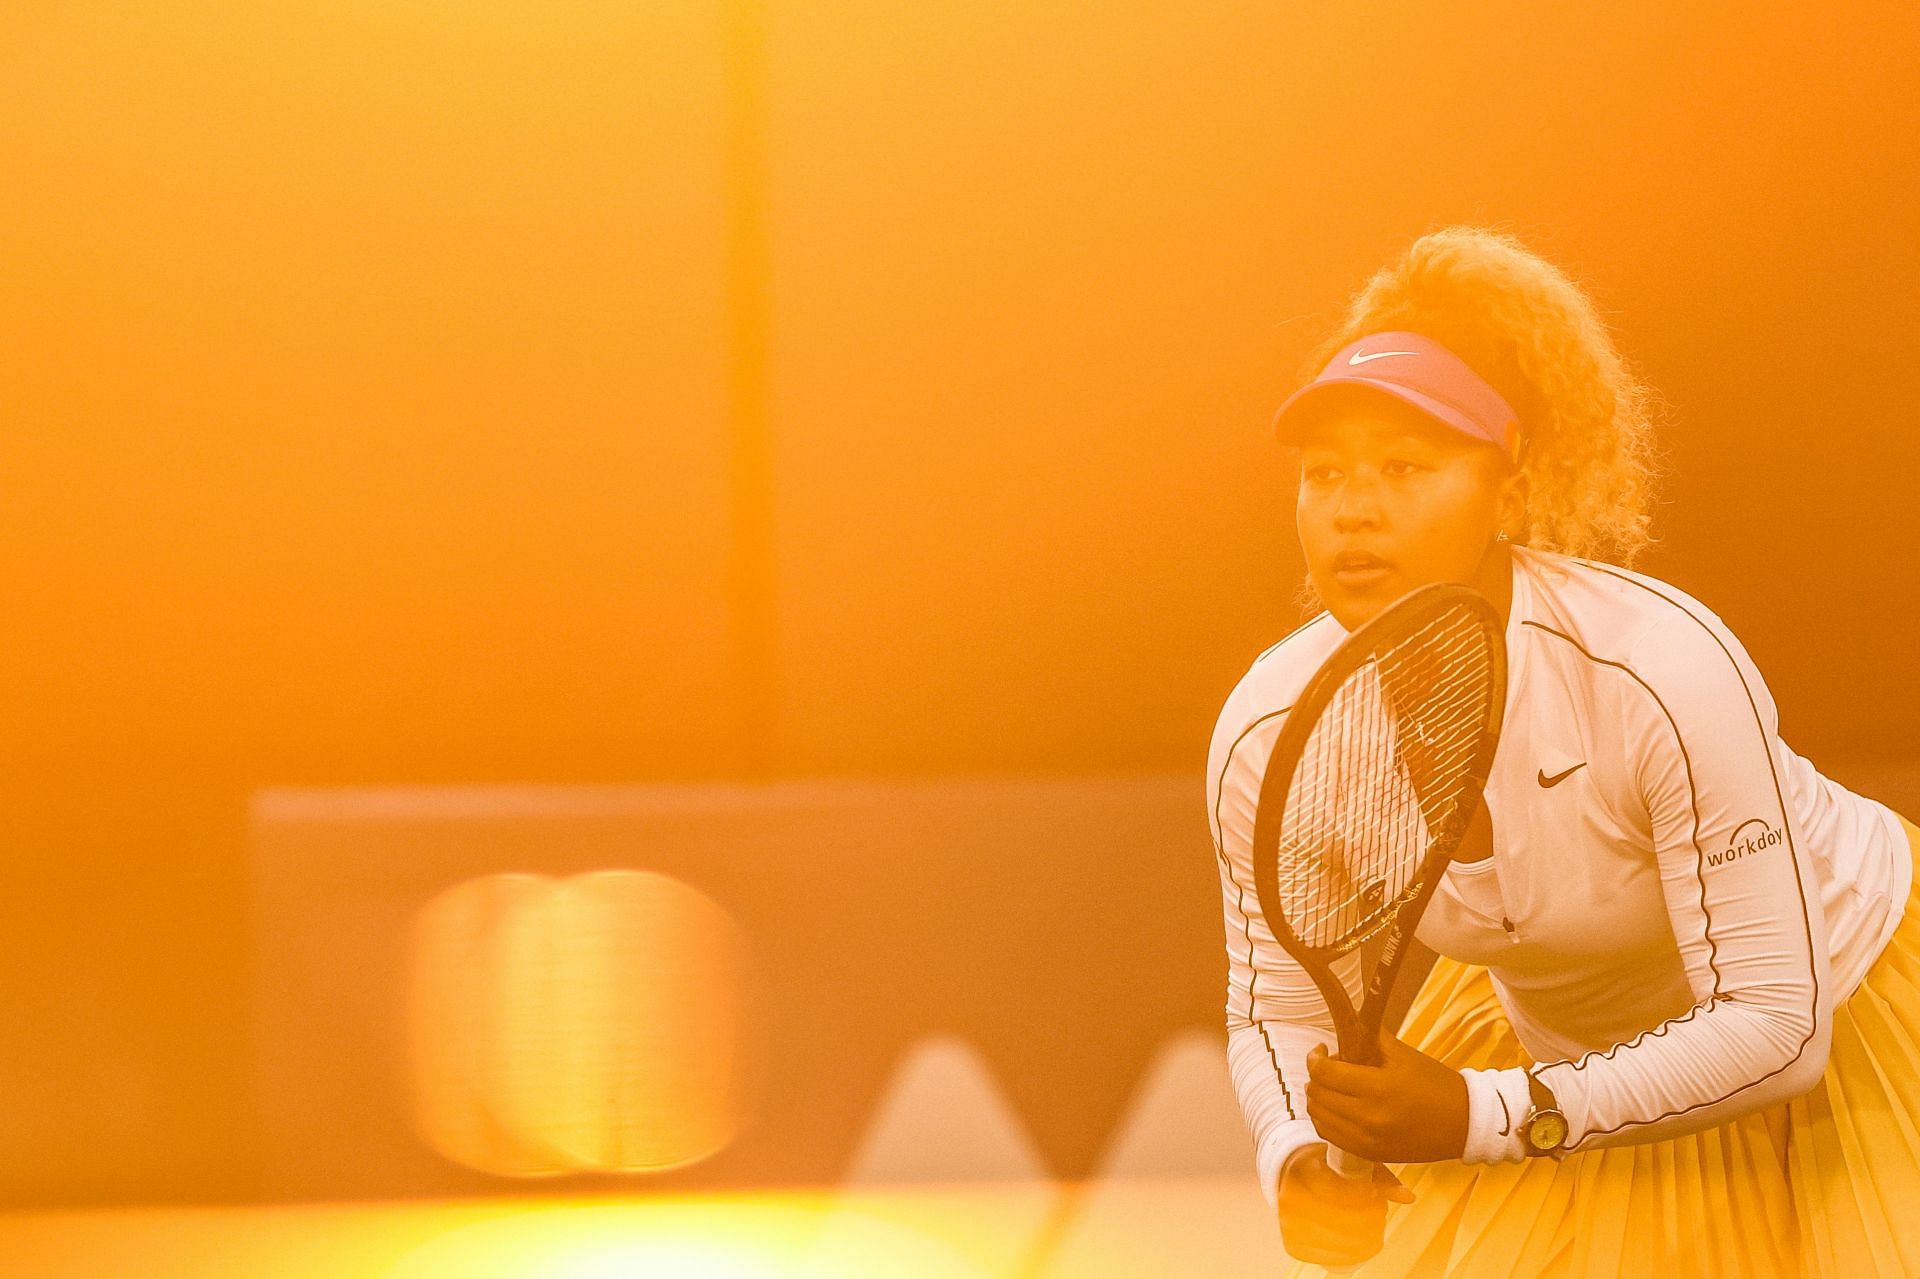 Naomi Osaka awaits Coco Gauff&#039;s serve in the Silicon Valley Classic earlier this month.